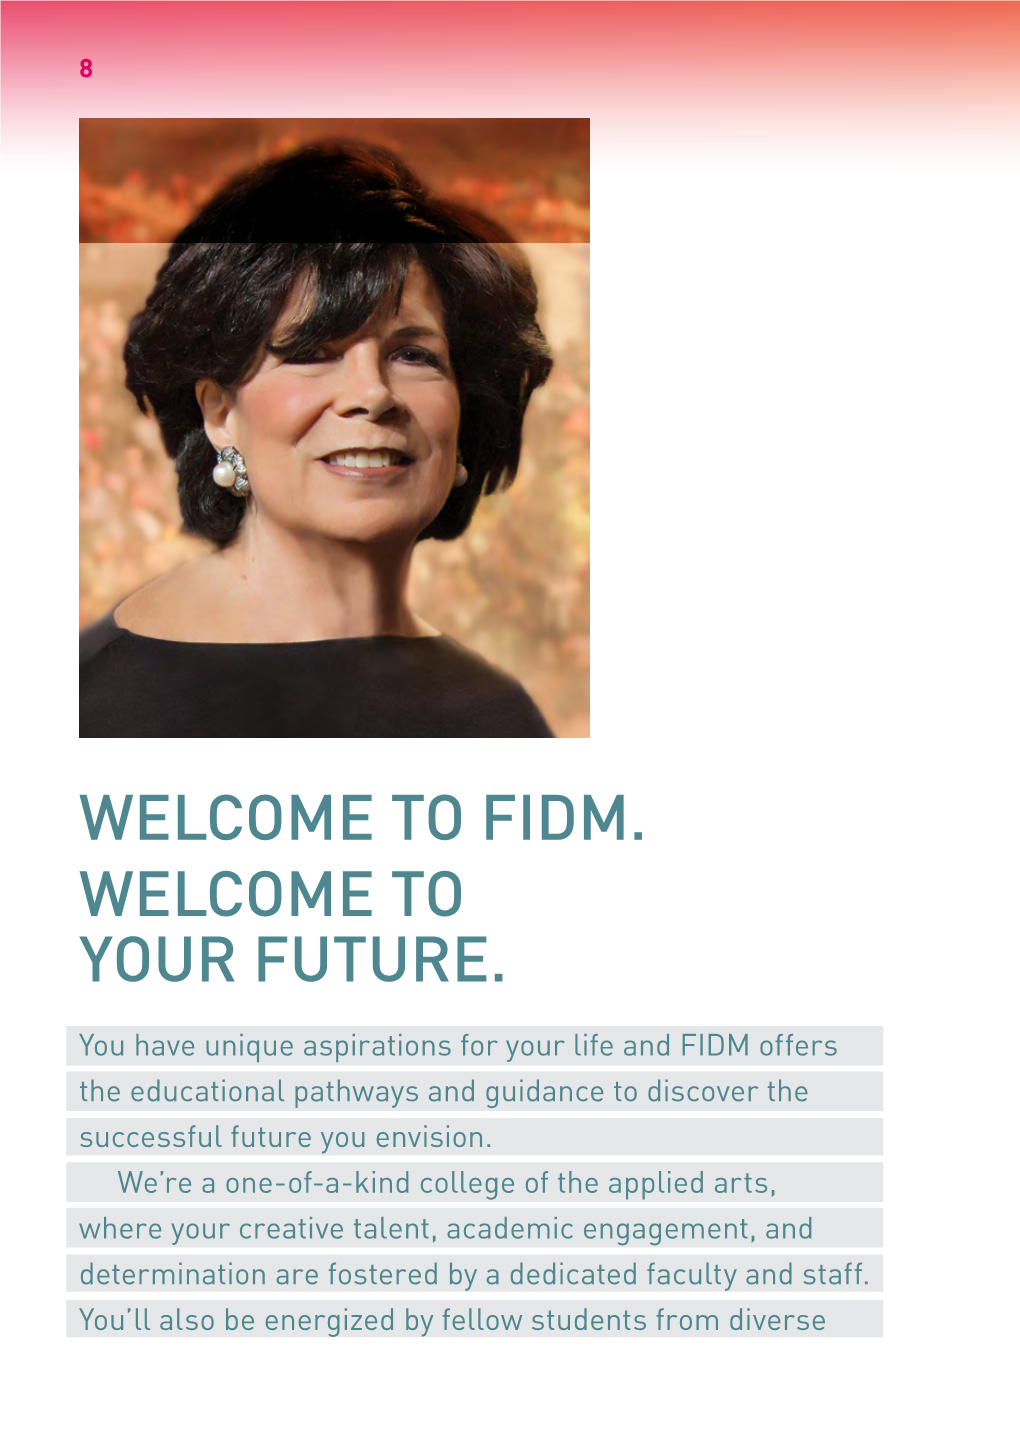 Fidm. Welcome to Your Future